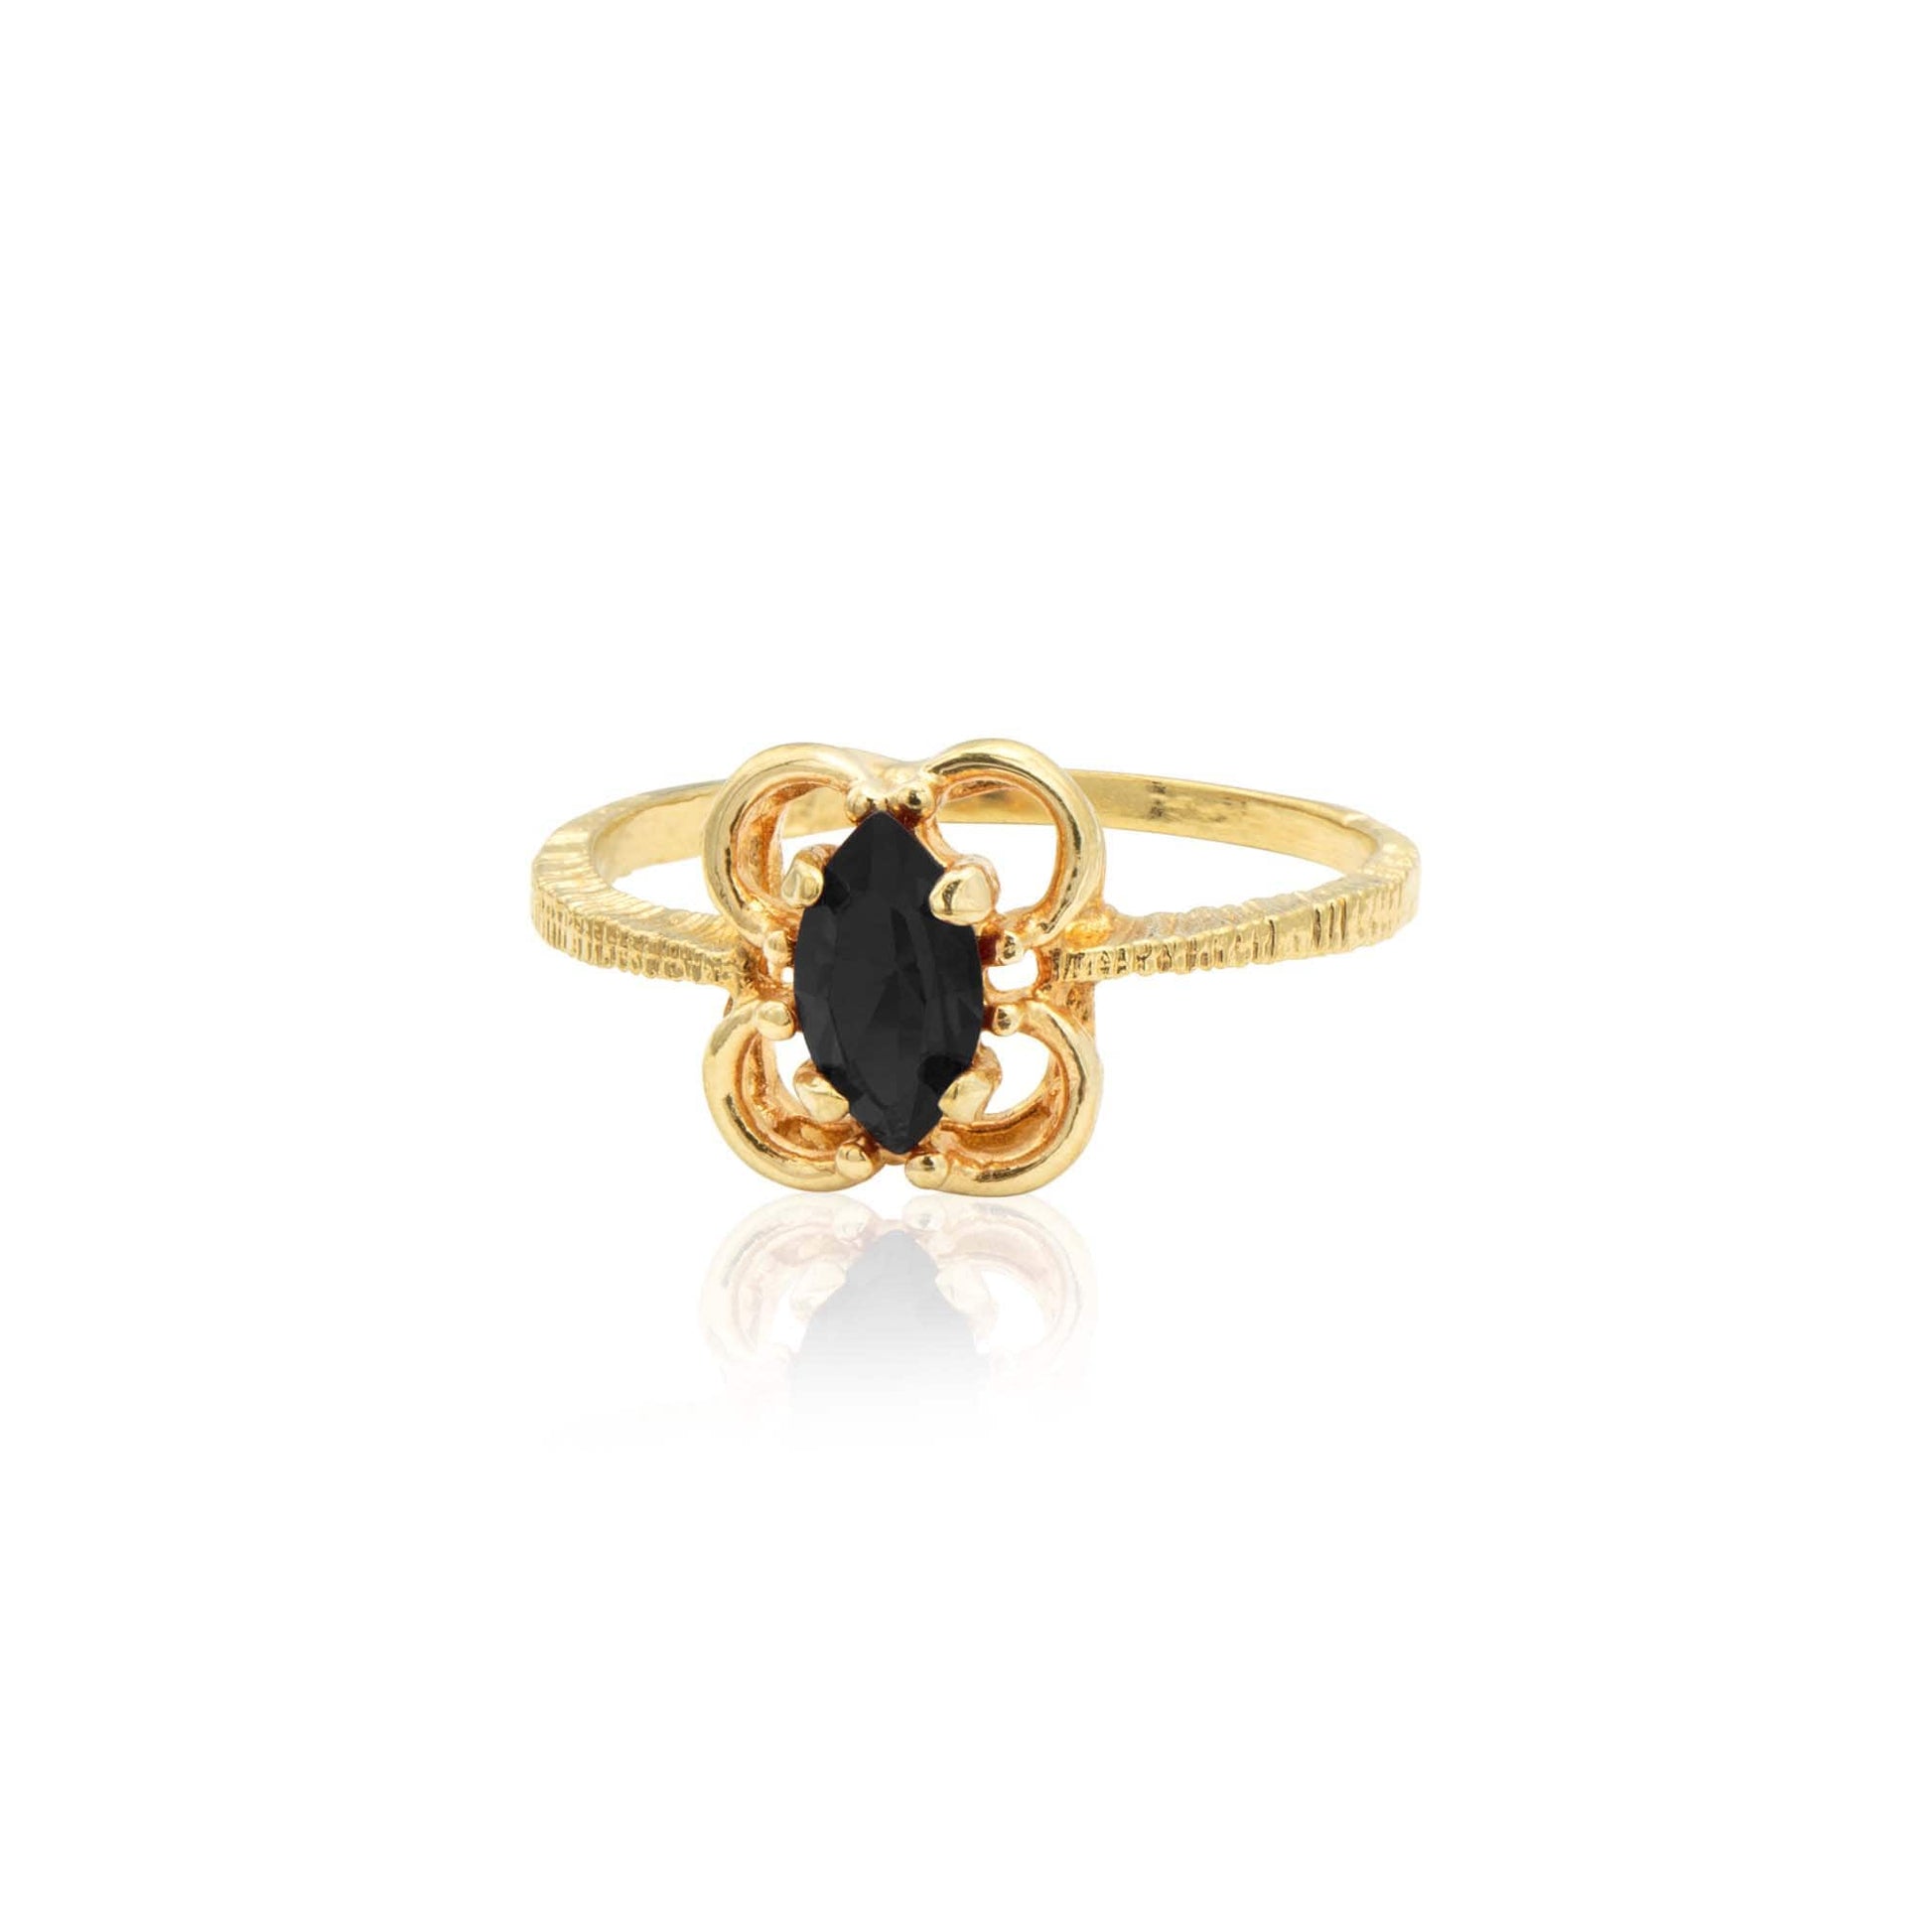 Vintage Ring Jet Black Austrian Crystal Stone Ring 18k Gold Dainty Small Antique Womans Jewelry R586 - Limited Stock - Never Worn